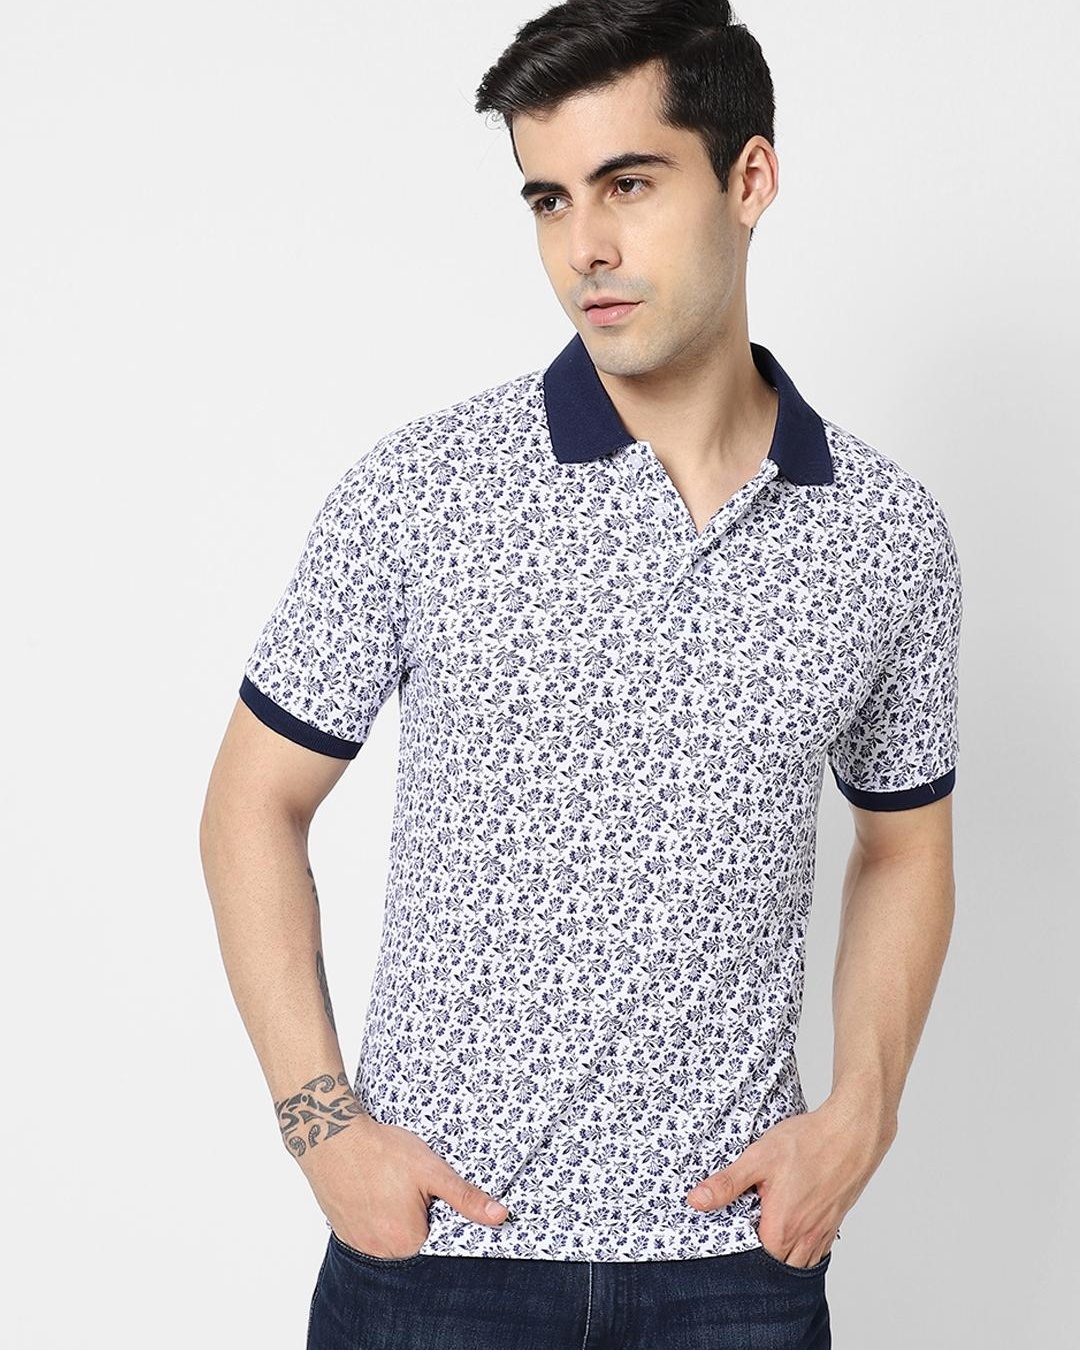 Buy Men's White Floral Printed Polo T-shirt Online at Bewakoof